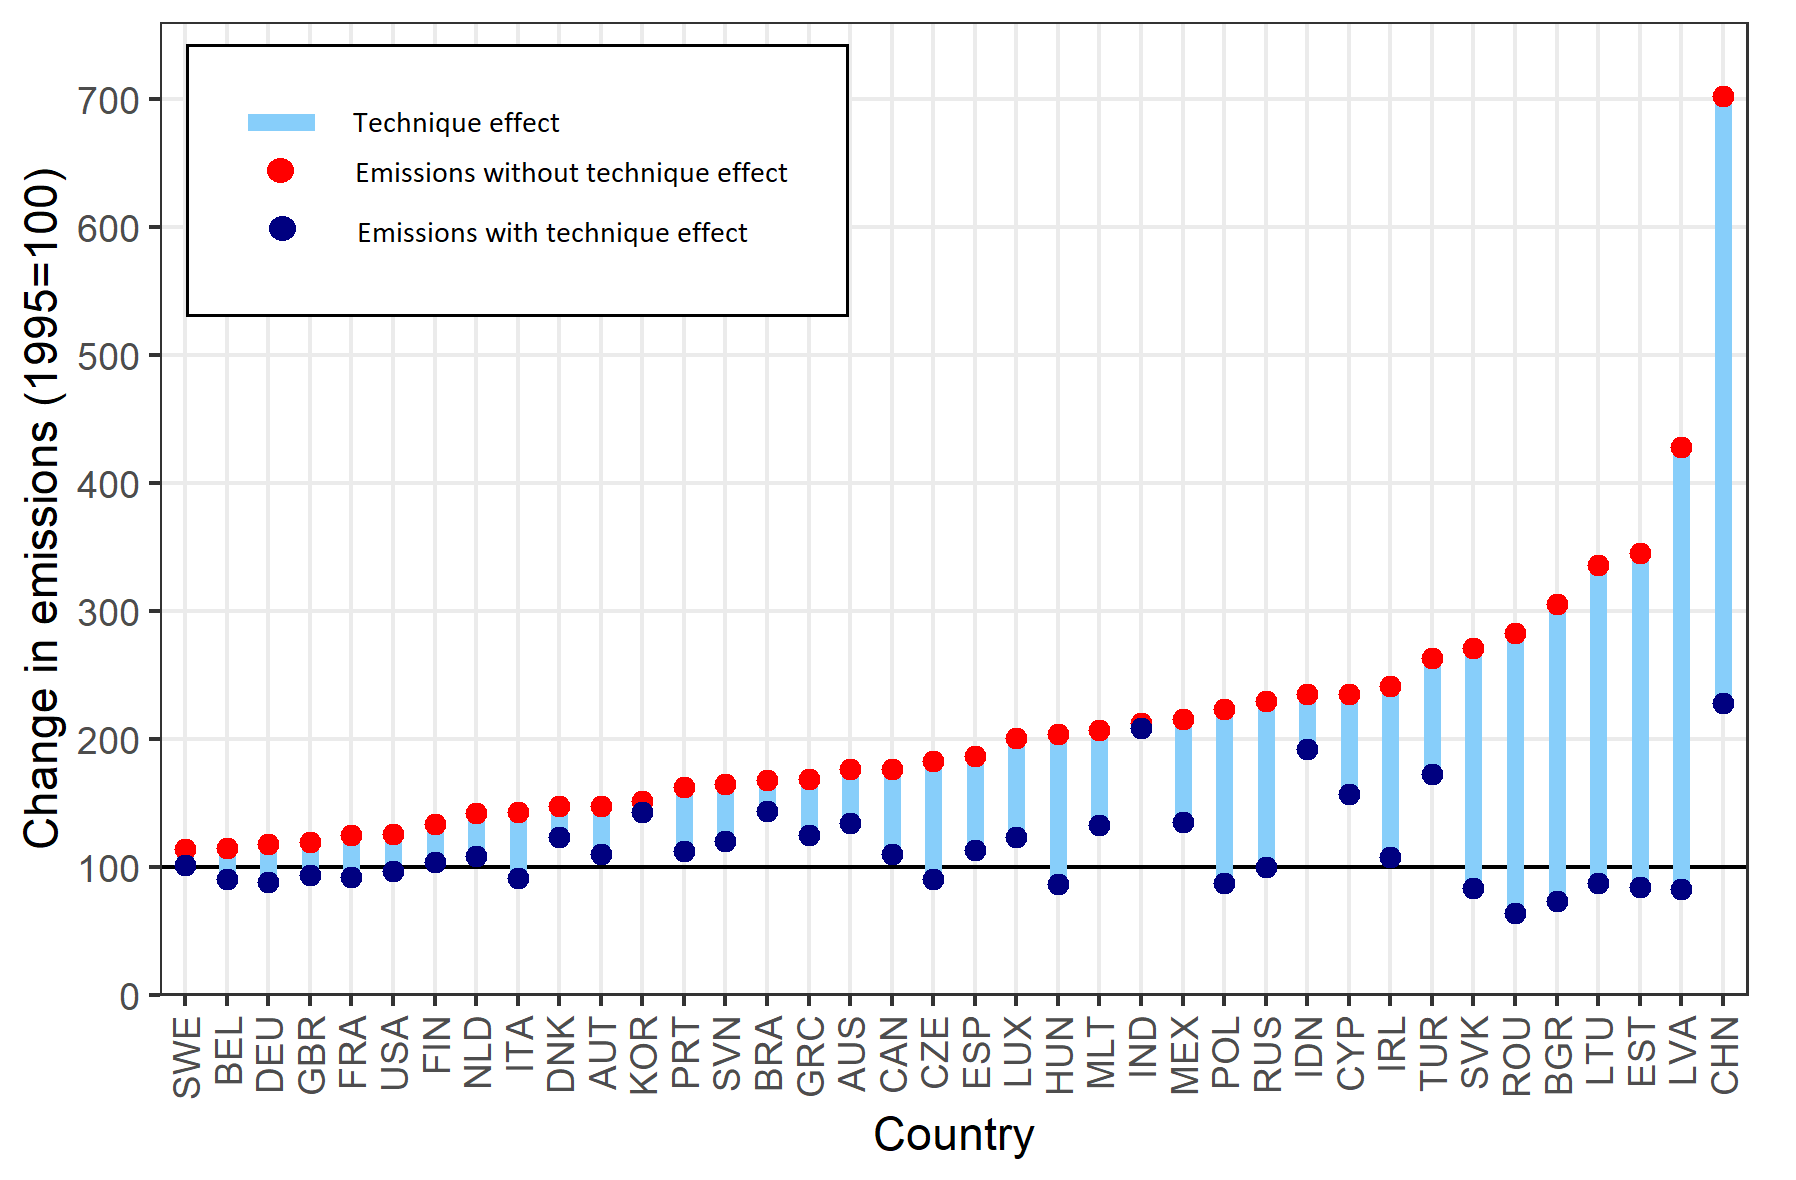 Growth of carbon emissions 1995-2009 with and without technological improvement<br>Data source: GTAP